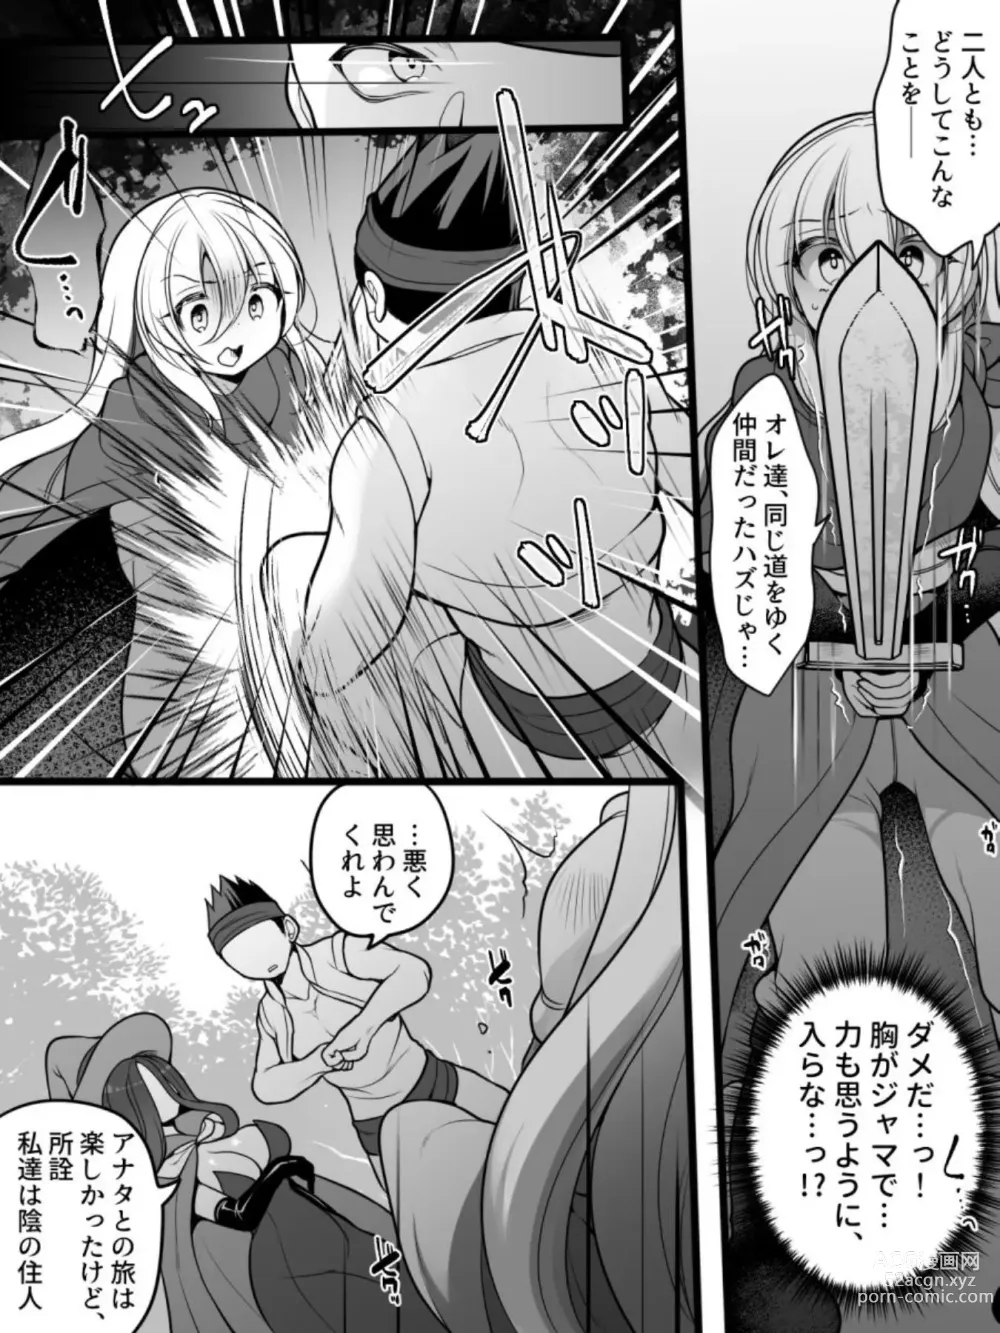 Page 4 of doujinshi TS Impregnated Princess ~A story about a former hero who becomes the princess of a group of orcs~